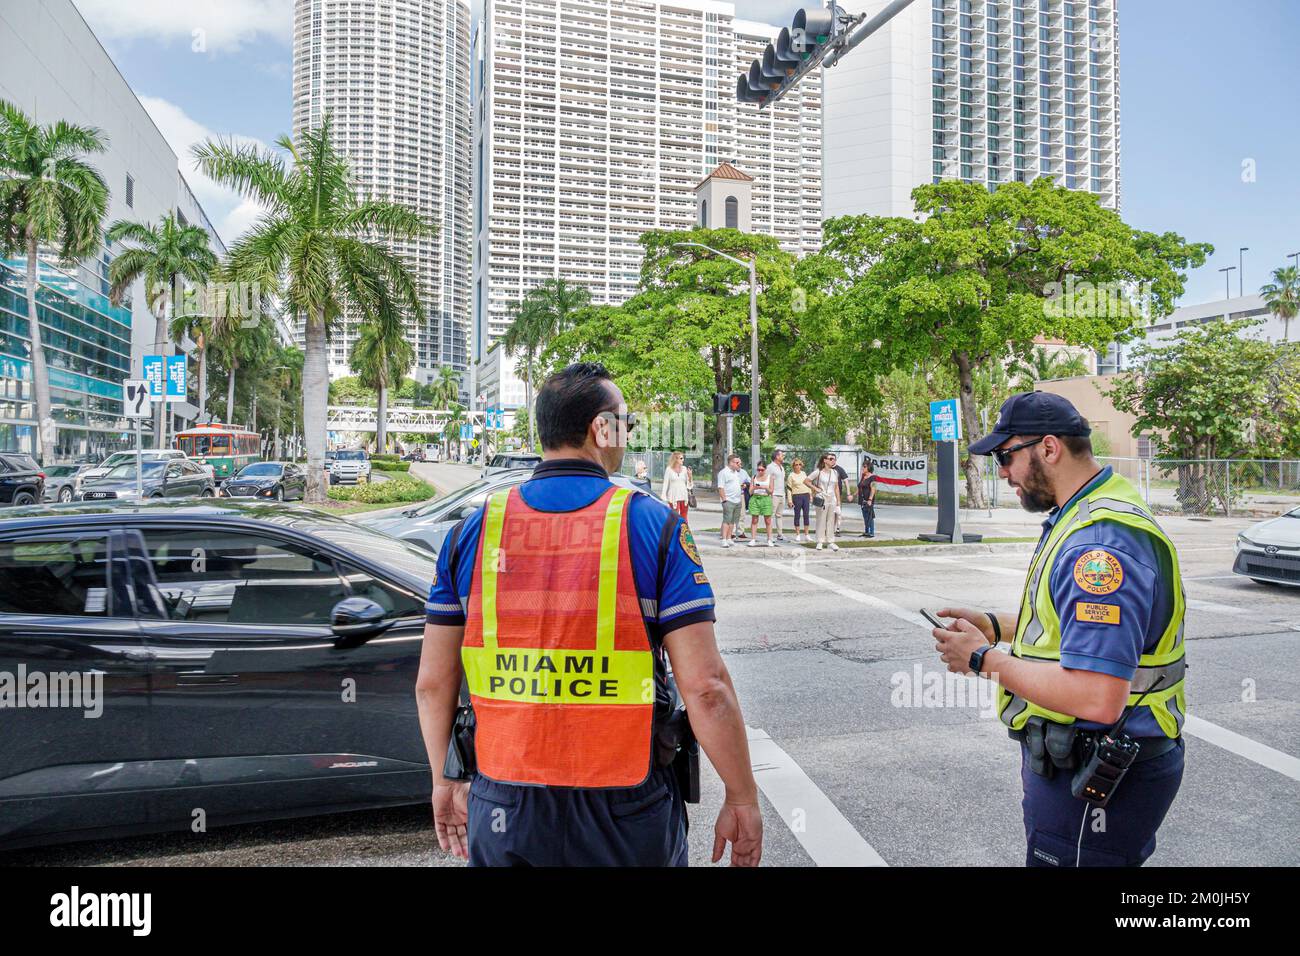 Miami Florida,Biscayne Boulevard,city police policeman policemen directing traffic,man men male adult adults,employee employees worker workers working Stock Photo